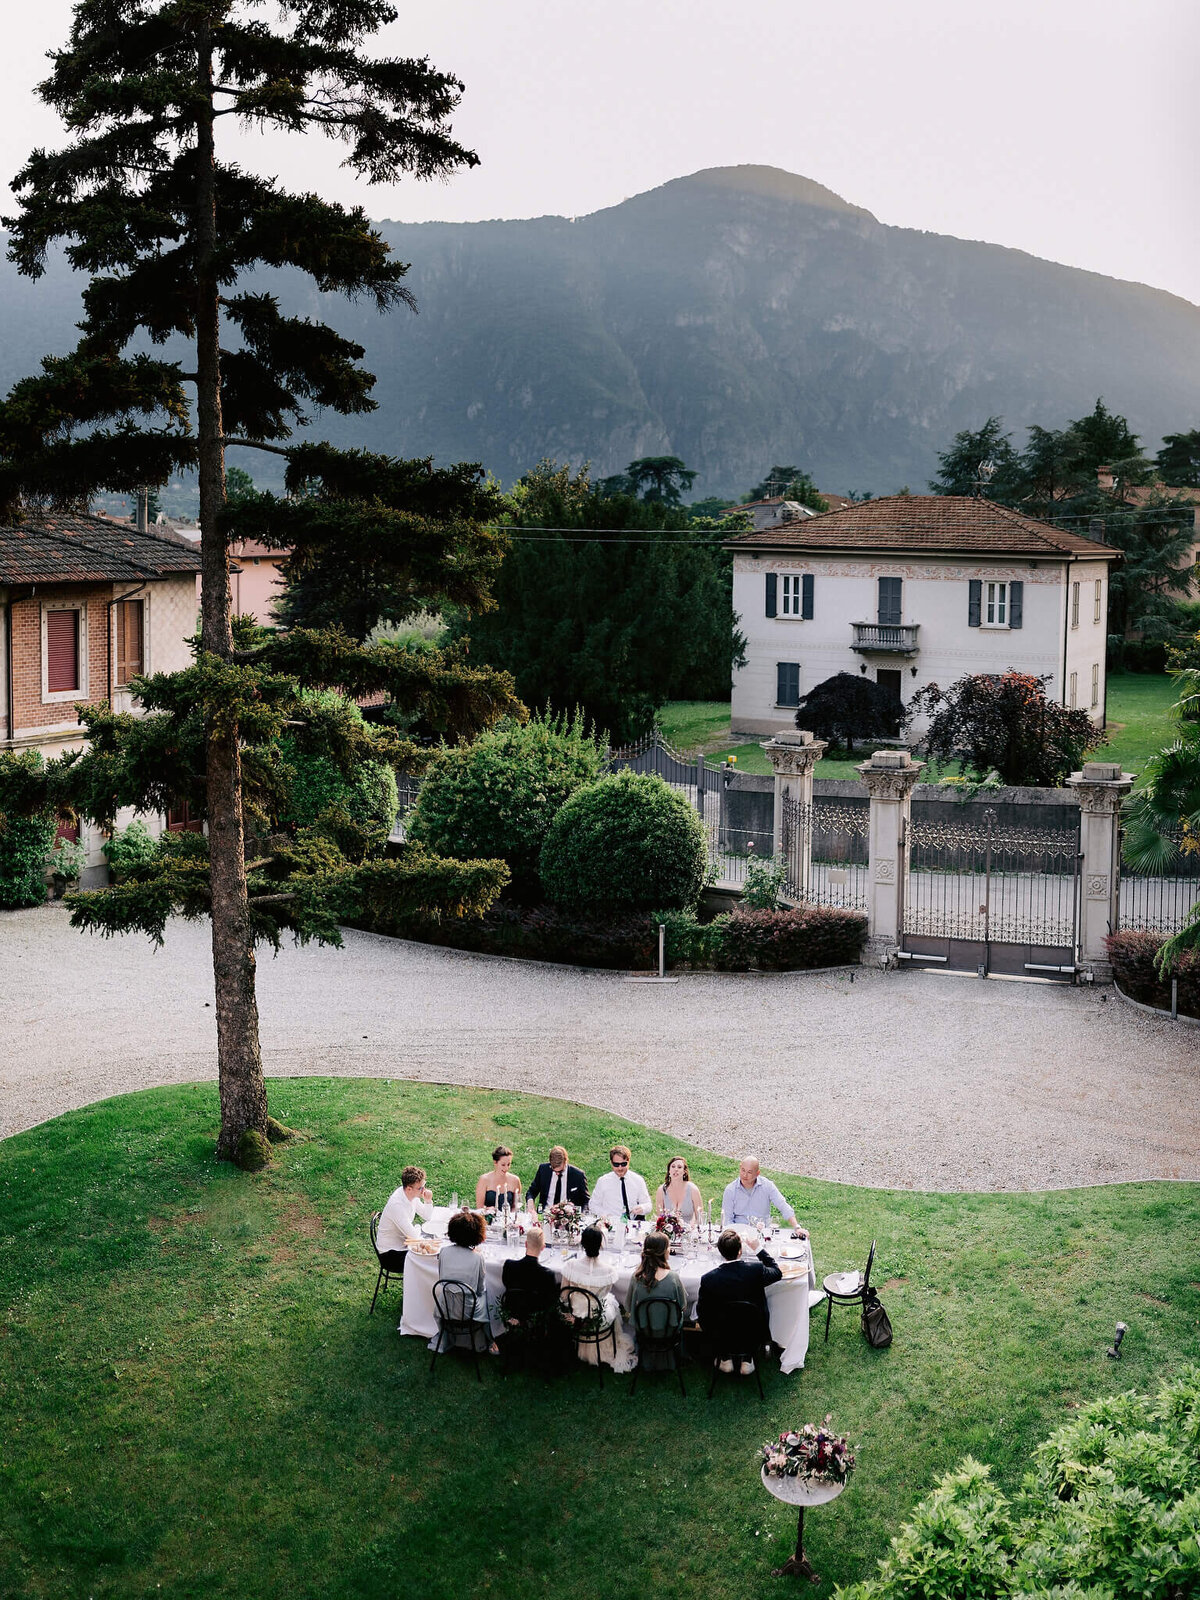 Top view of a group of people on a dining table in a garden, with trees, plants, villa and mountain in the background.